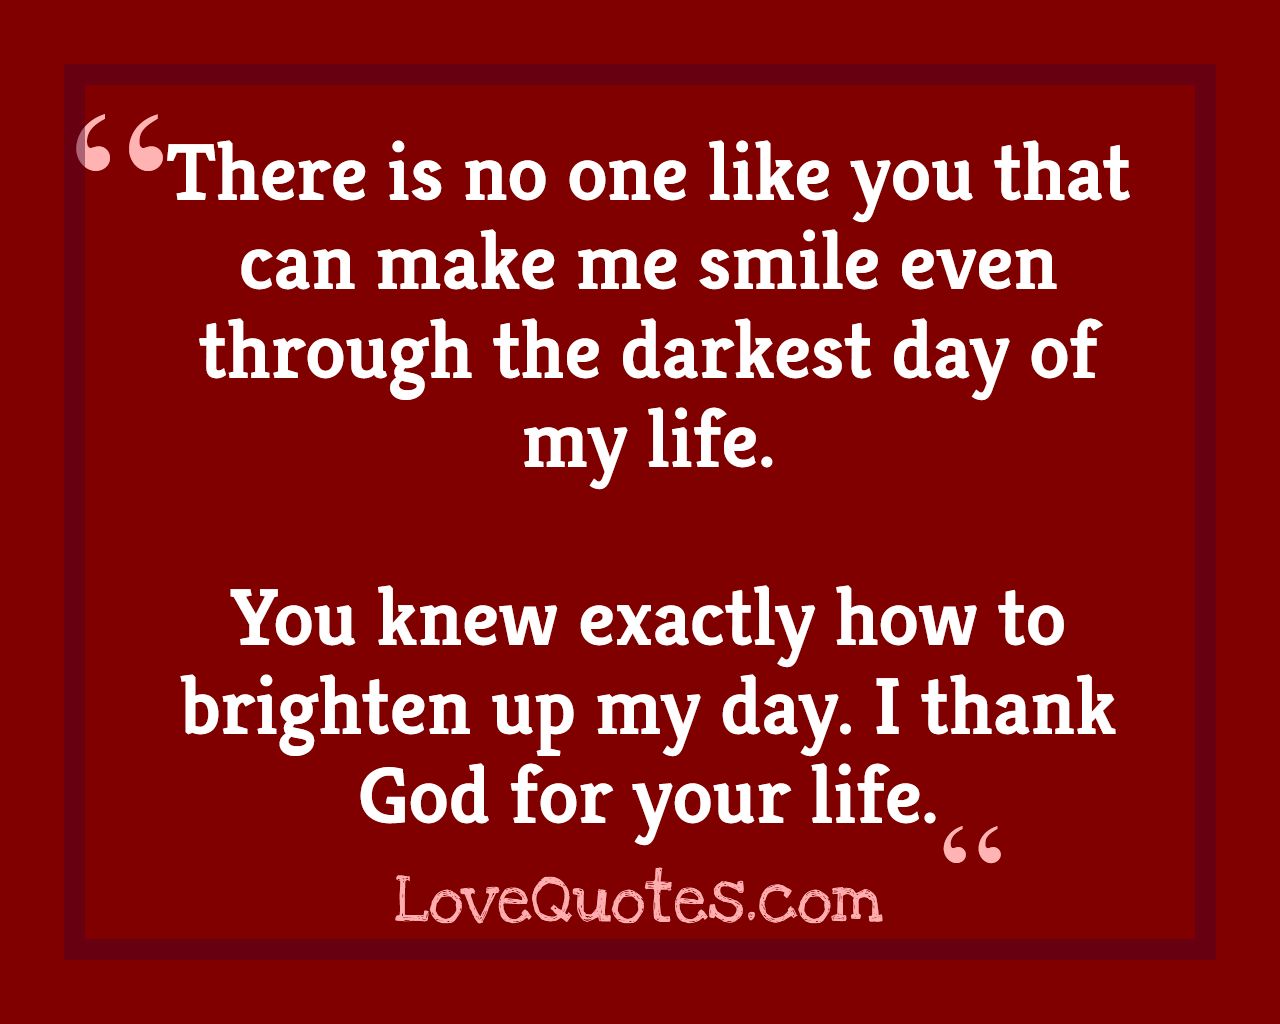 No One Like You - Love Quotes